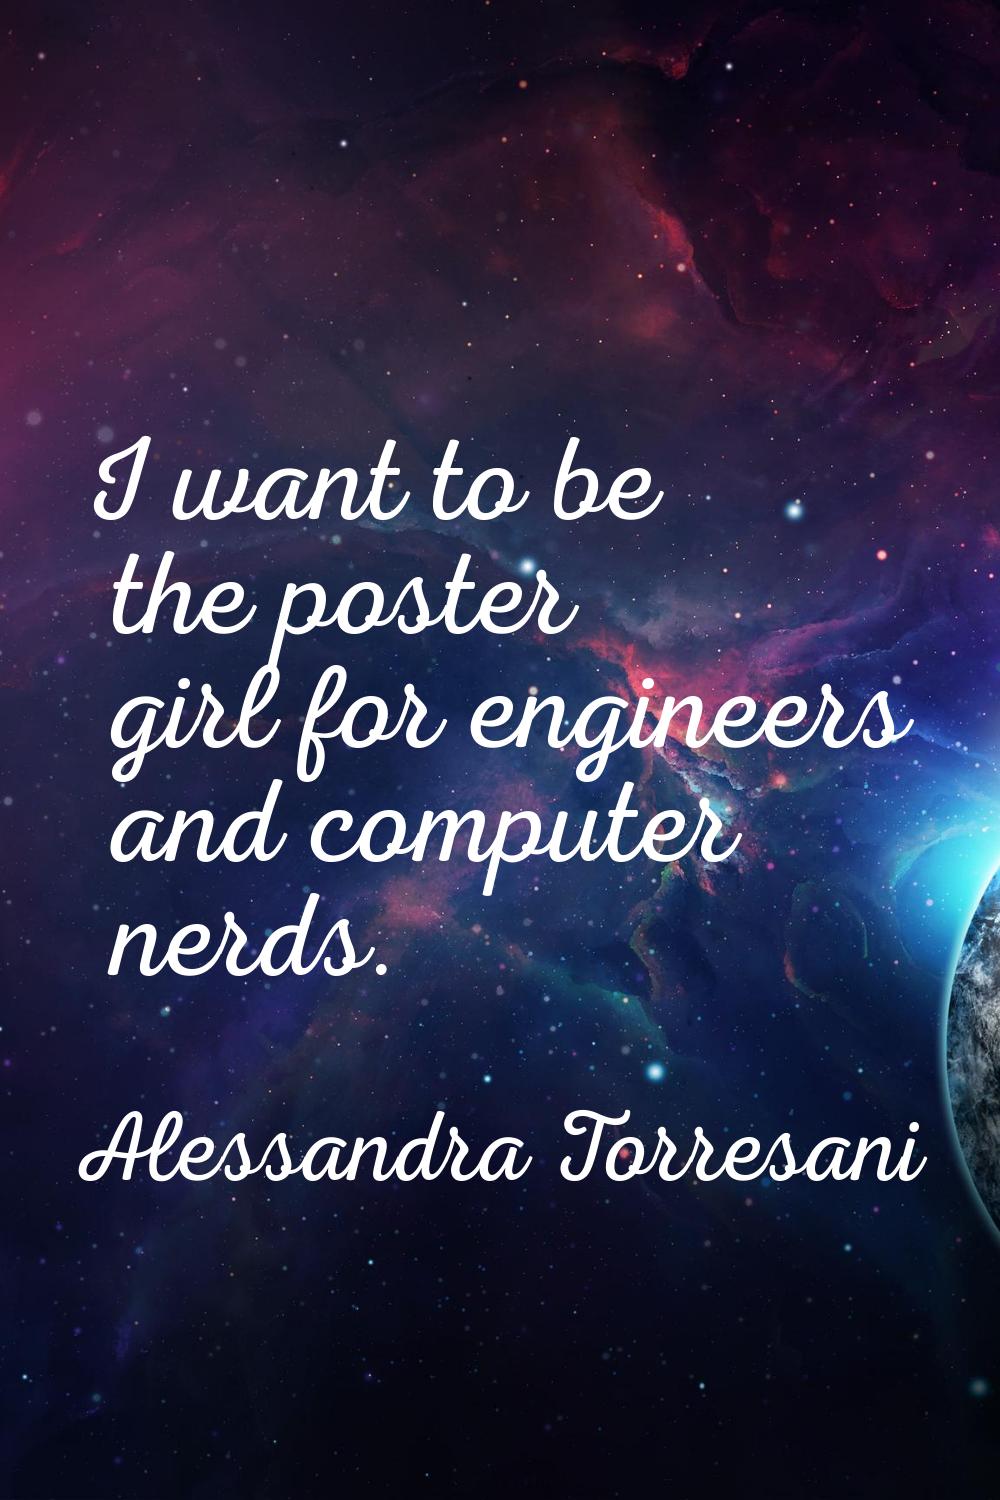 I want to be the poster girl for engineers and computer nerds.